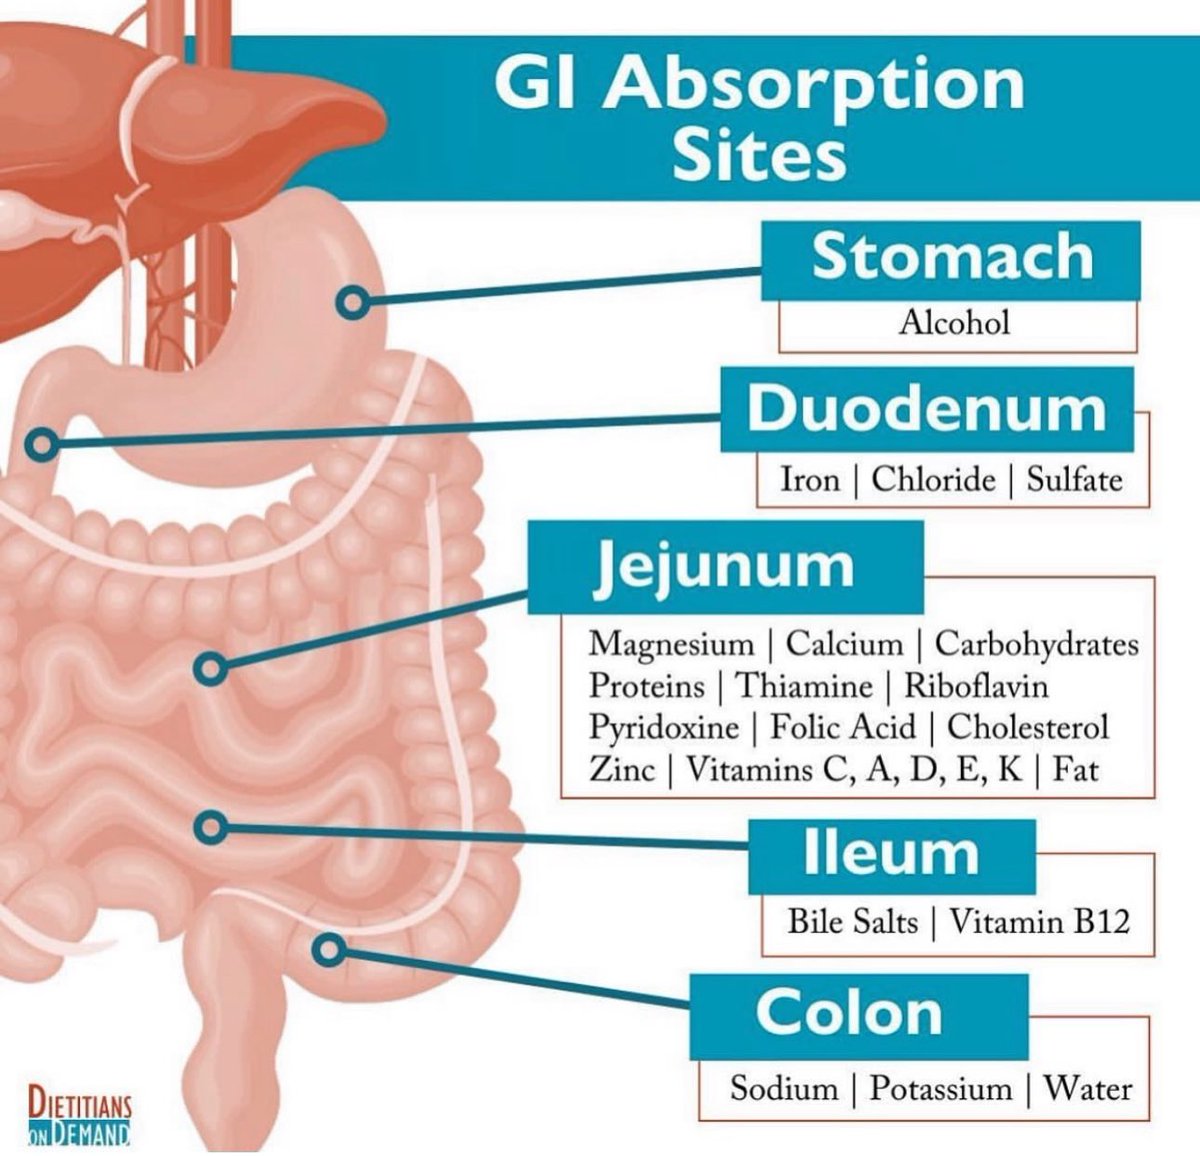 📌 GI Absorption Sites of Nutrients 

#MedEd #FOAMed #NutritionMatters #Nutrition 
Amazing work by @dietitiansondemand